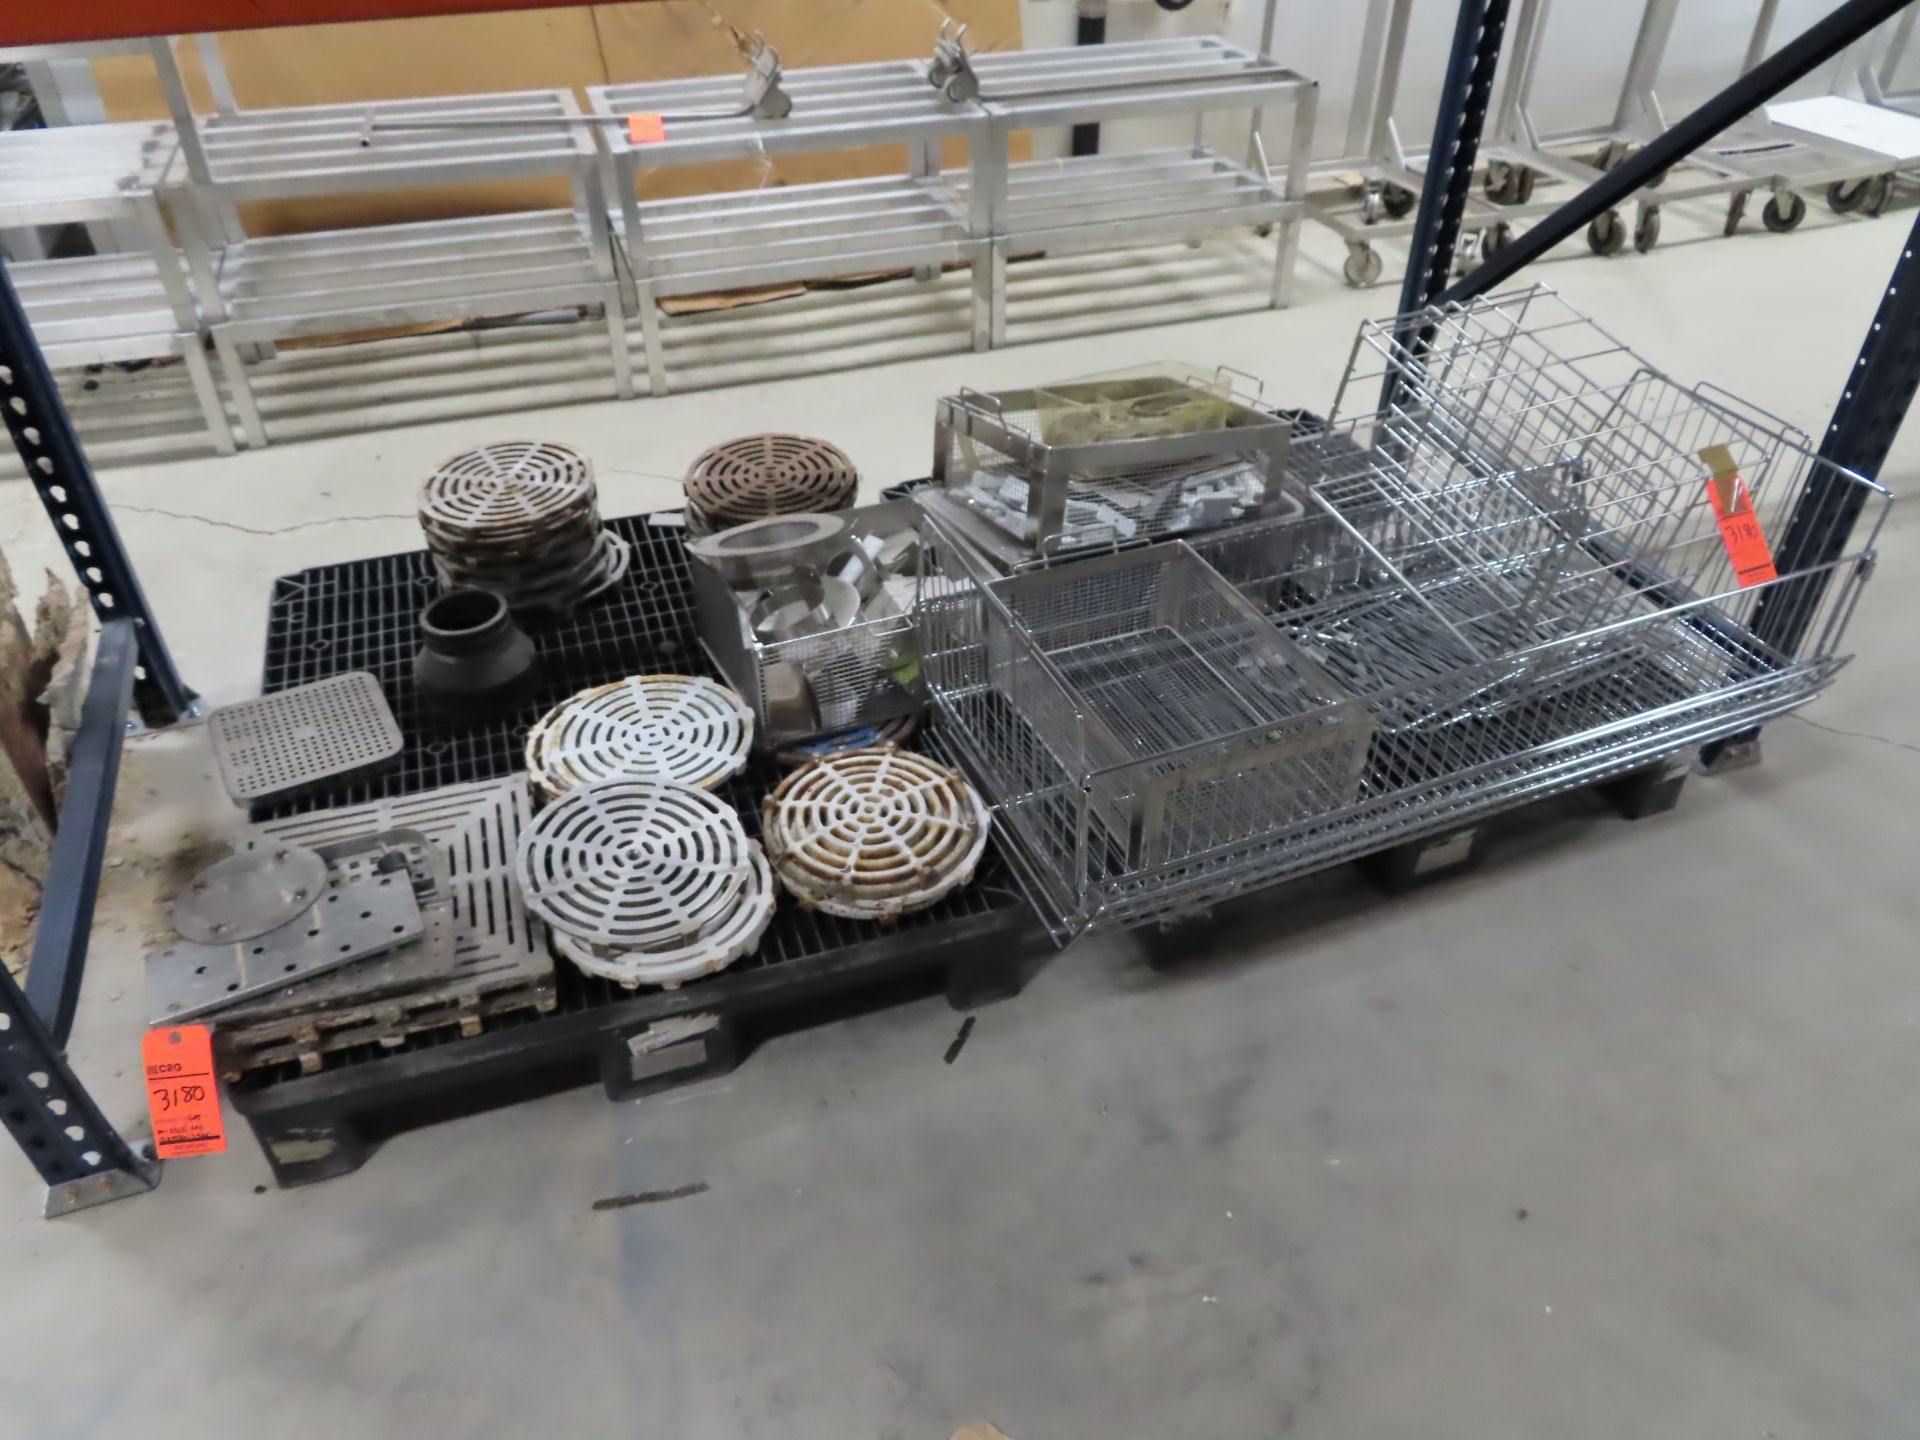 Lot of assorted stainless steel cage accessories, sipper sack holders, donnage shelving, etc. - Image 6 of 9